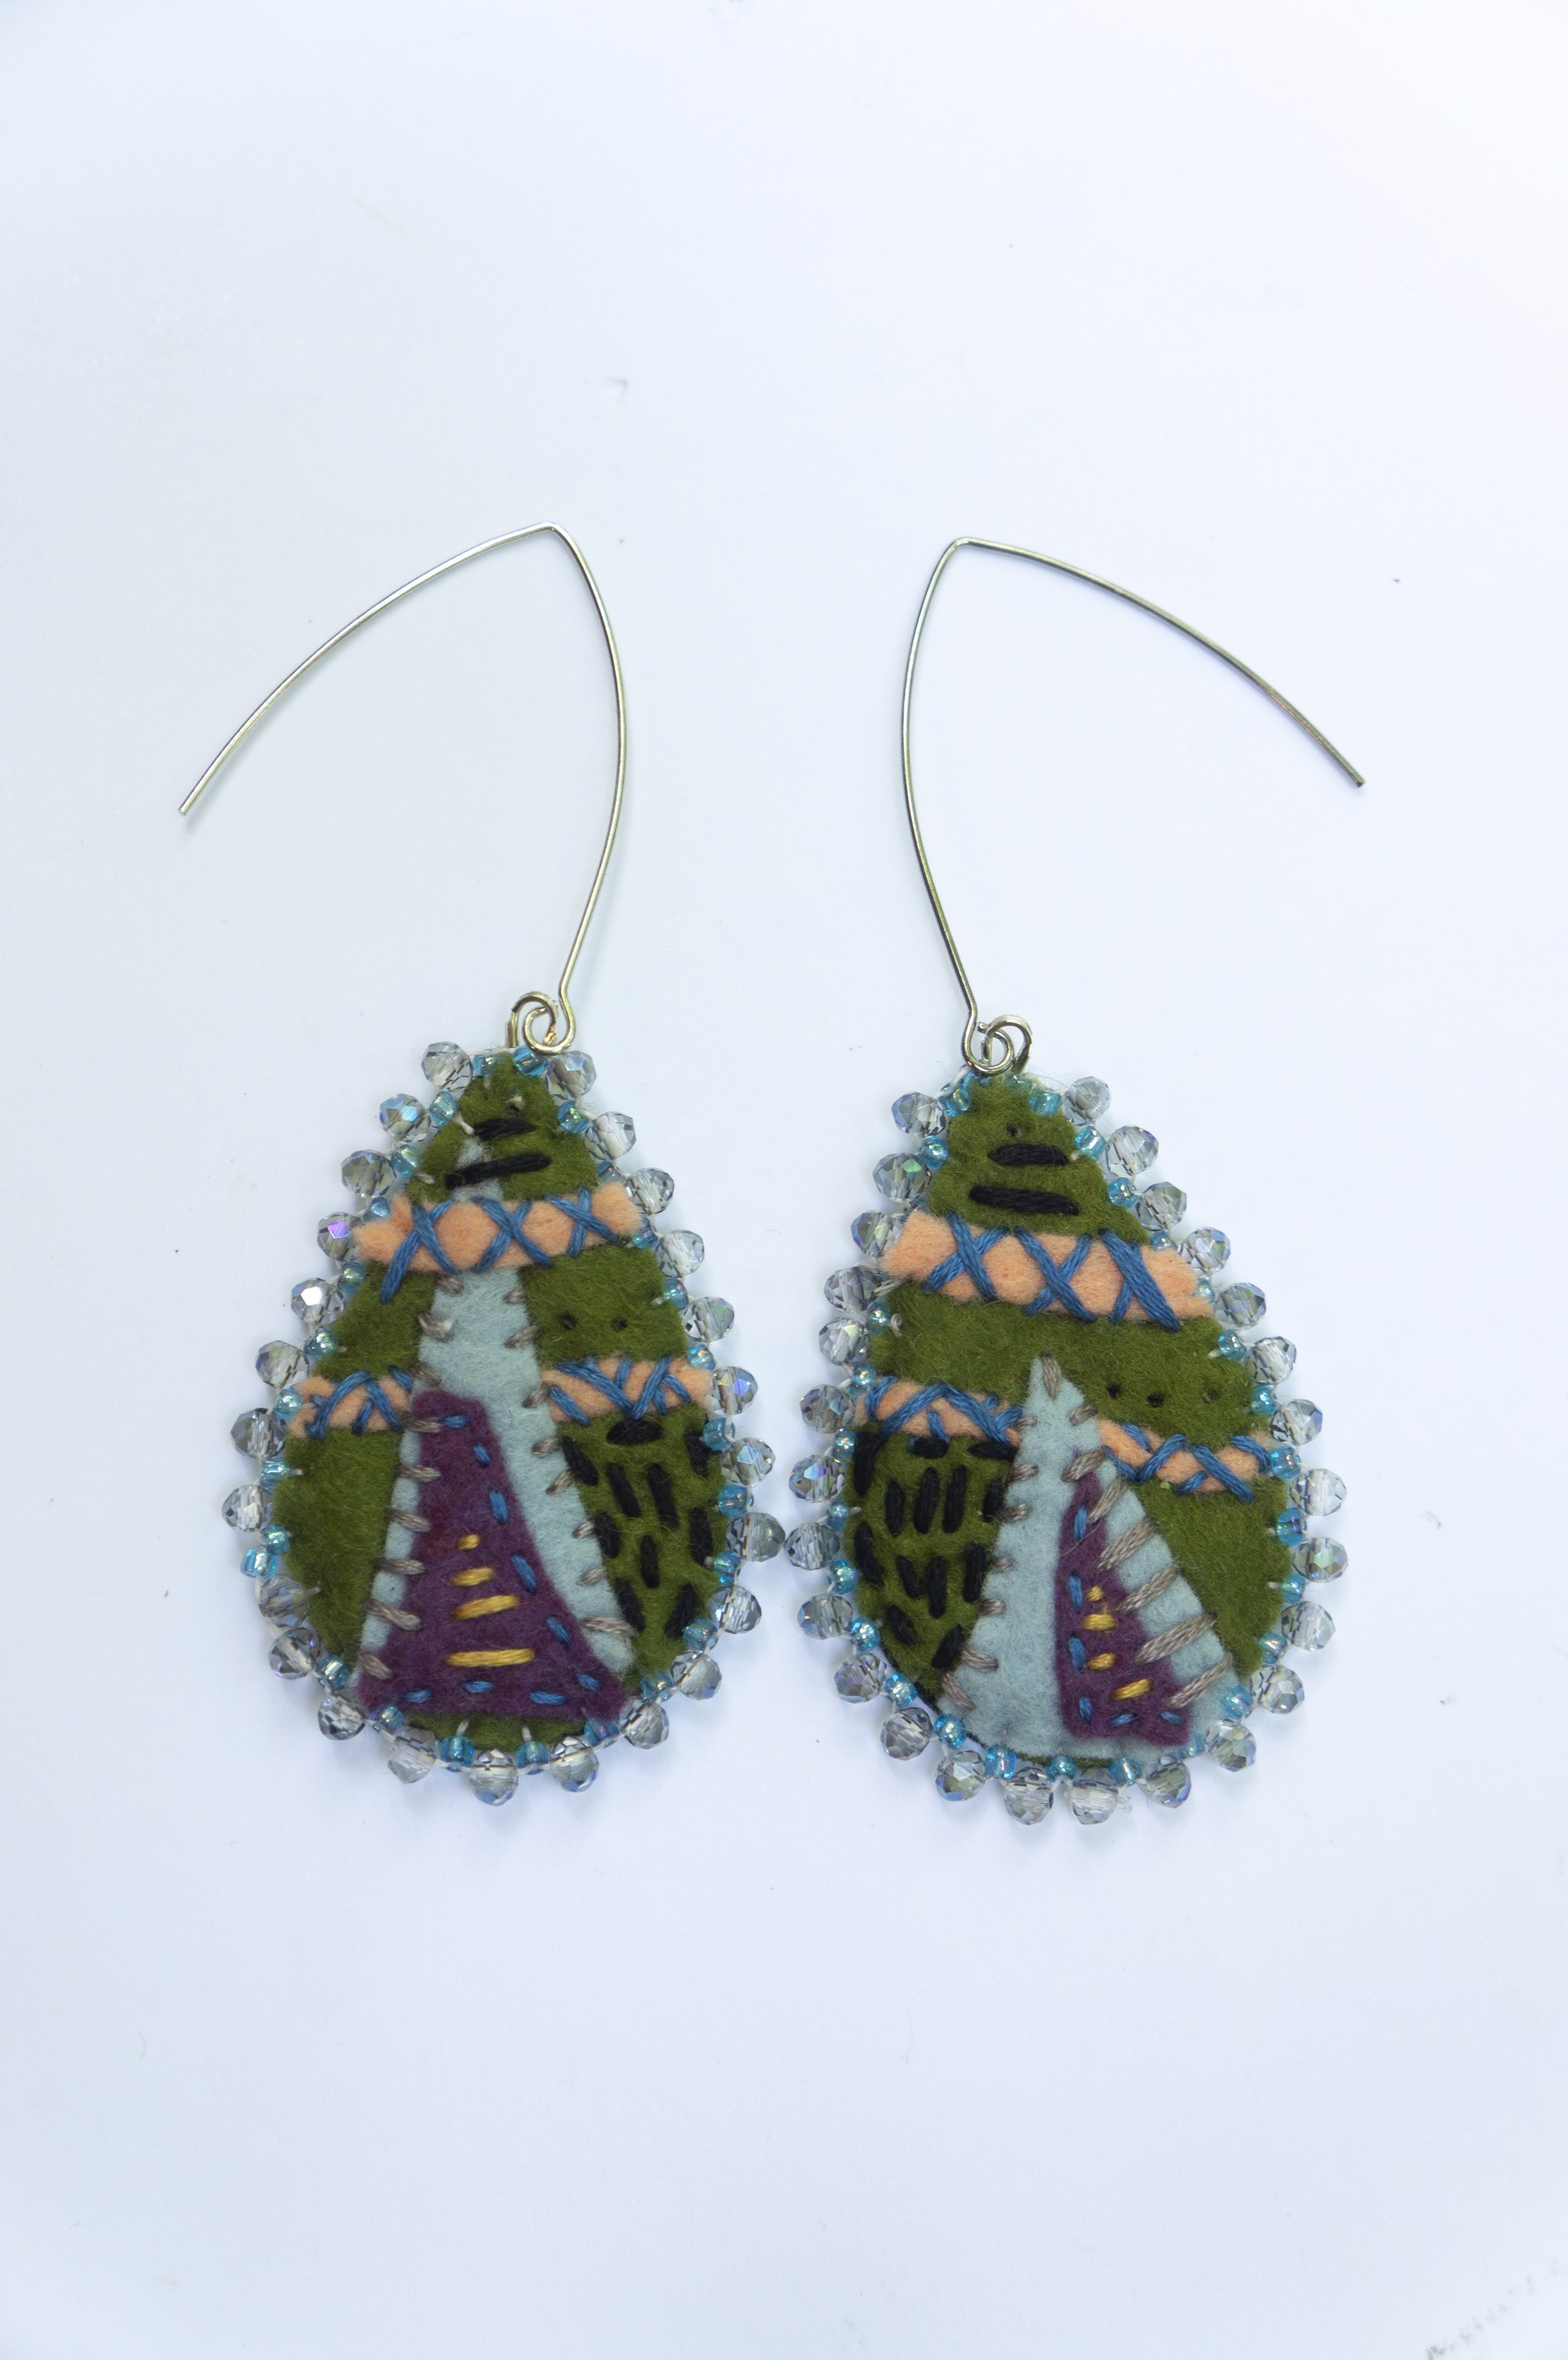 Green, blue edged, embroidered earrings by Hattie Lee